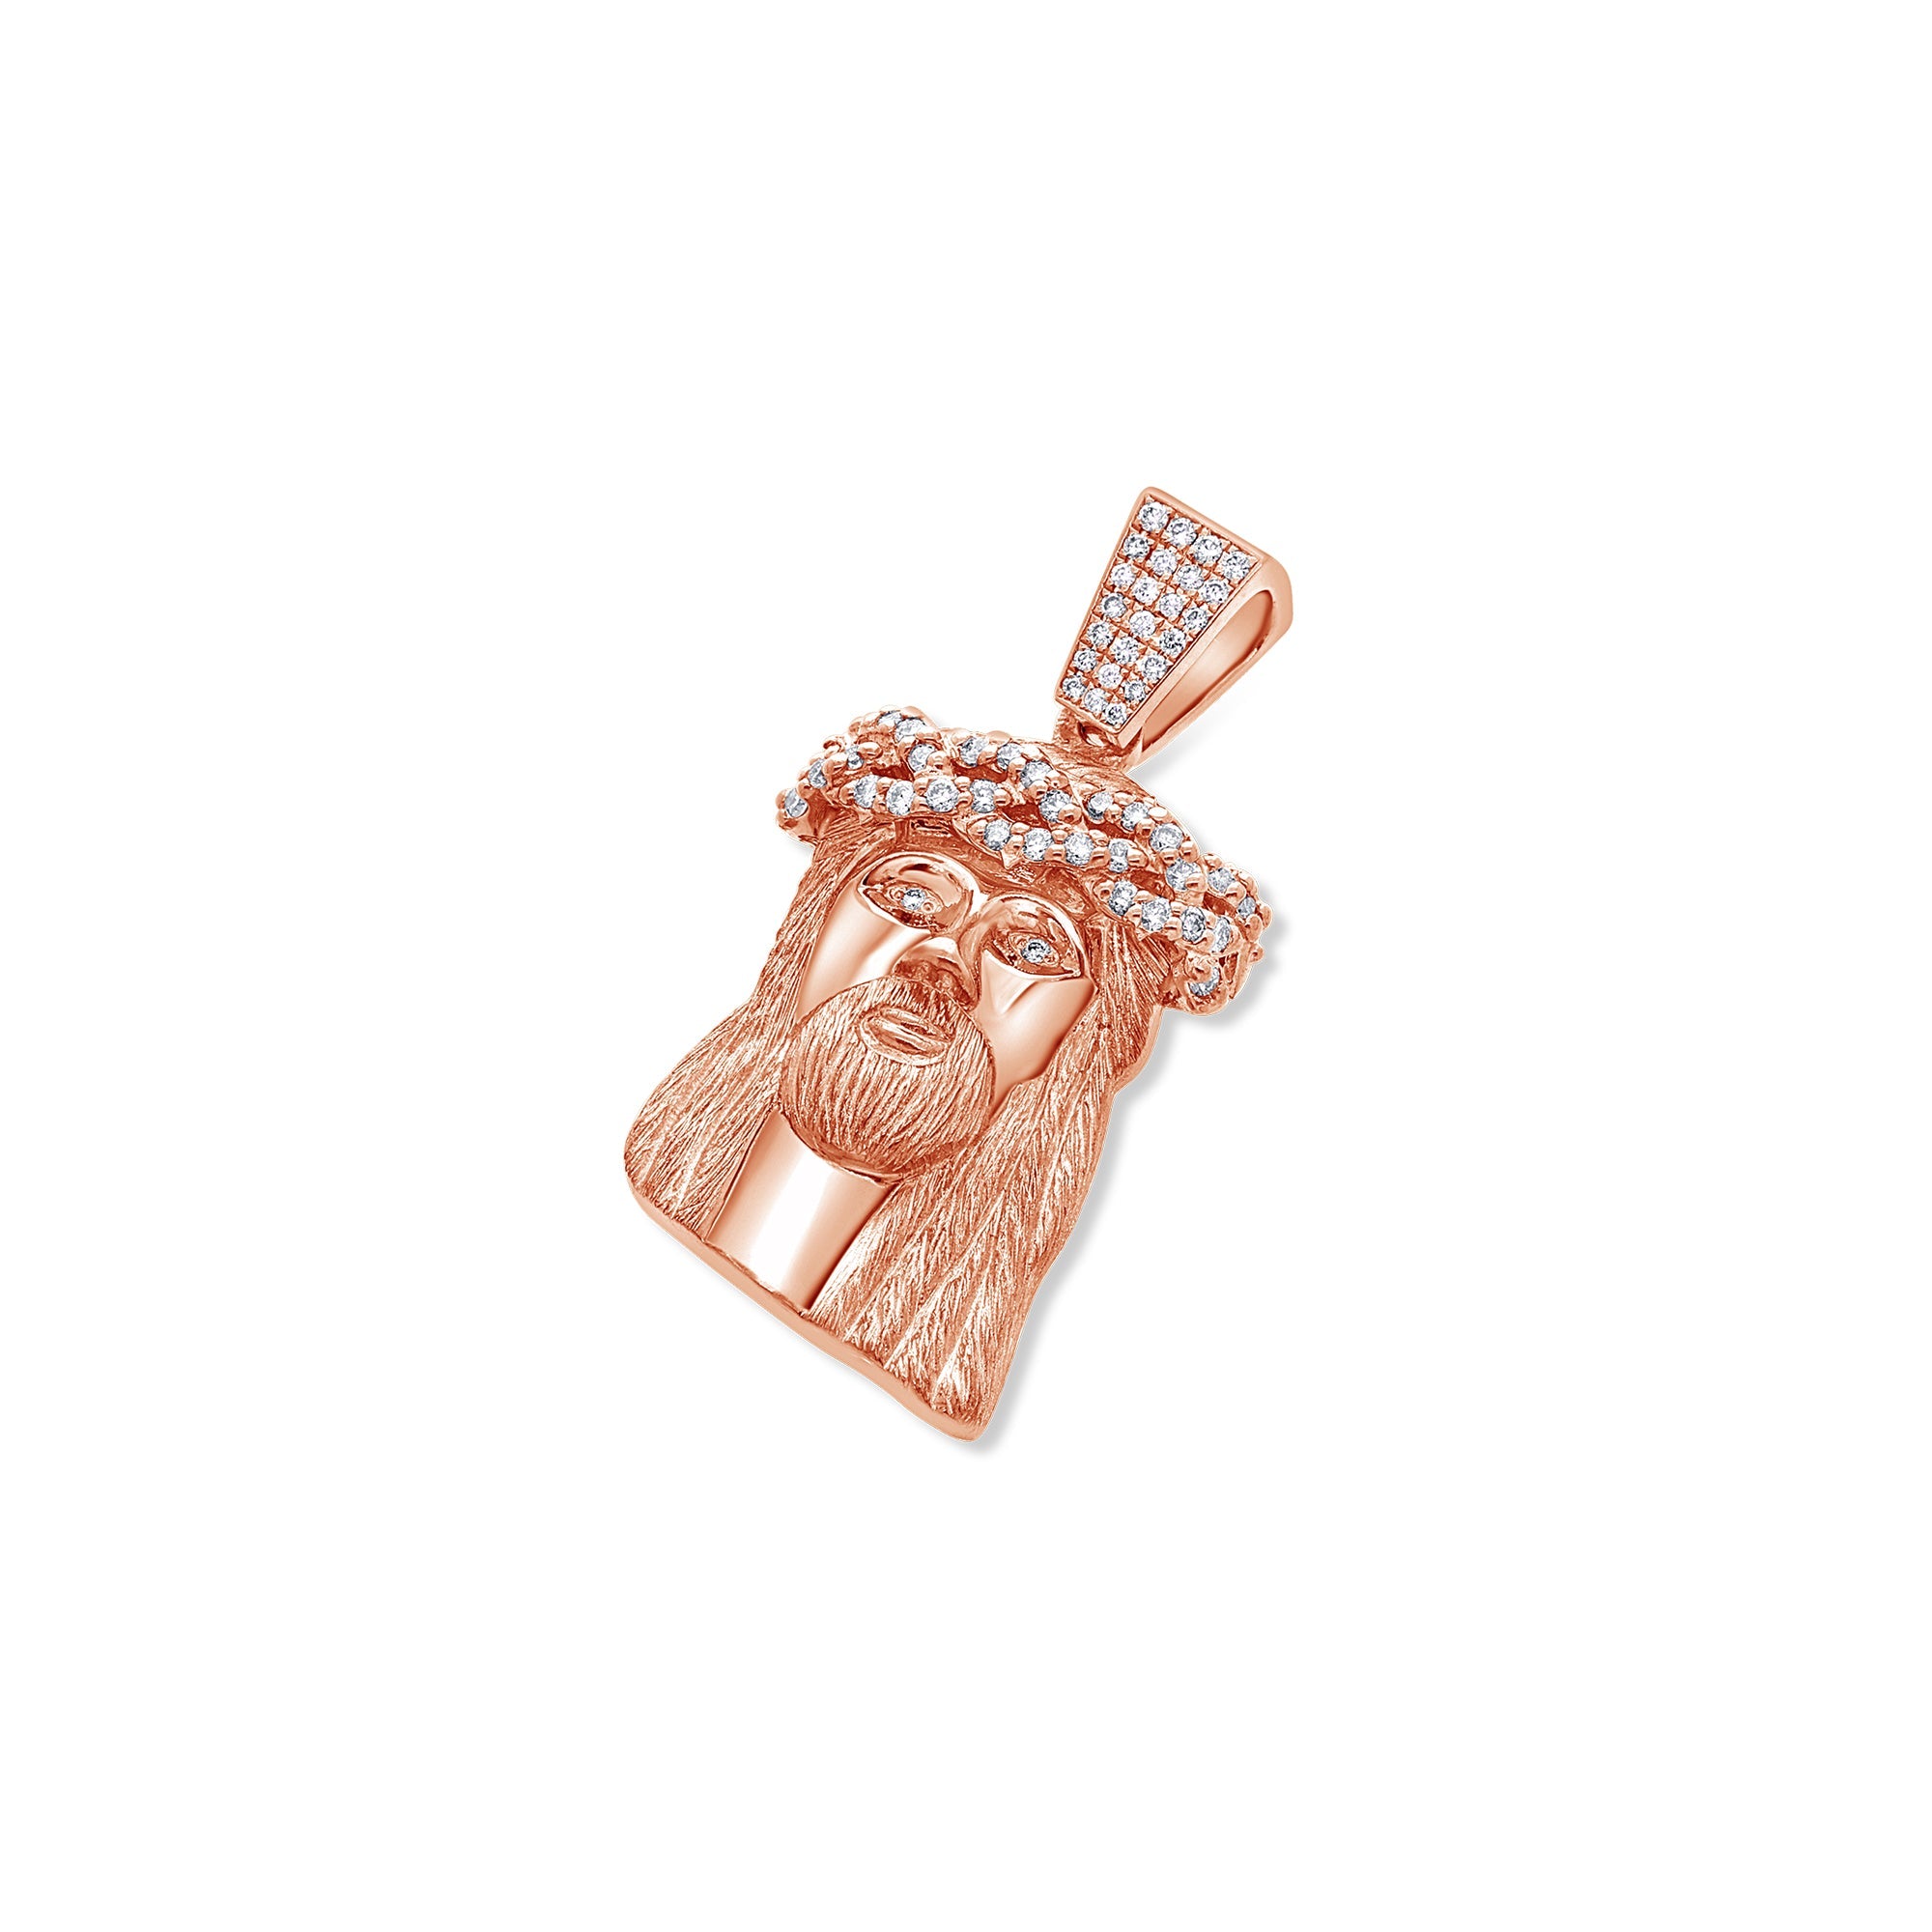 Milli Jesus Piece (Partially Iced) (14K ROSE GOLD) - IF & Co. Custom Jewelers